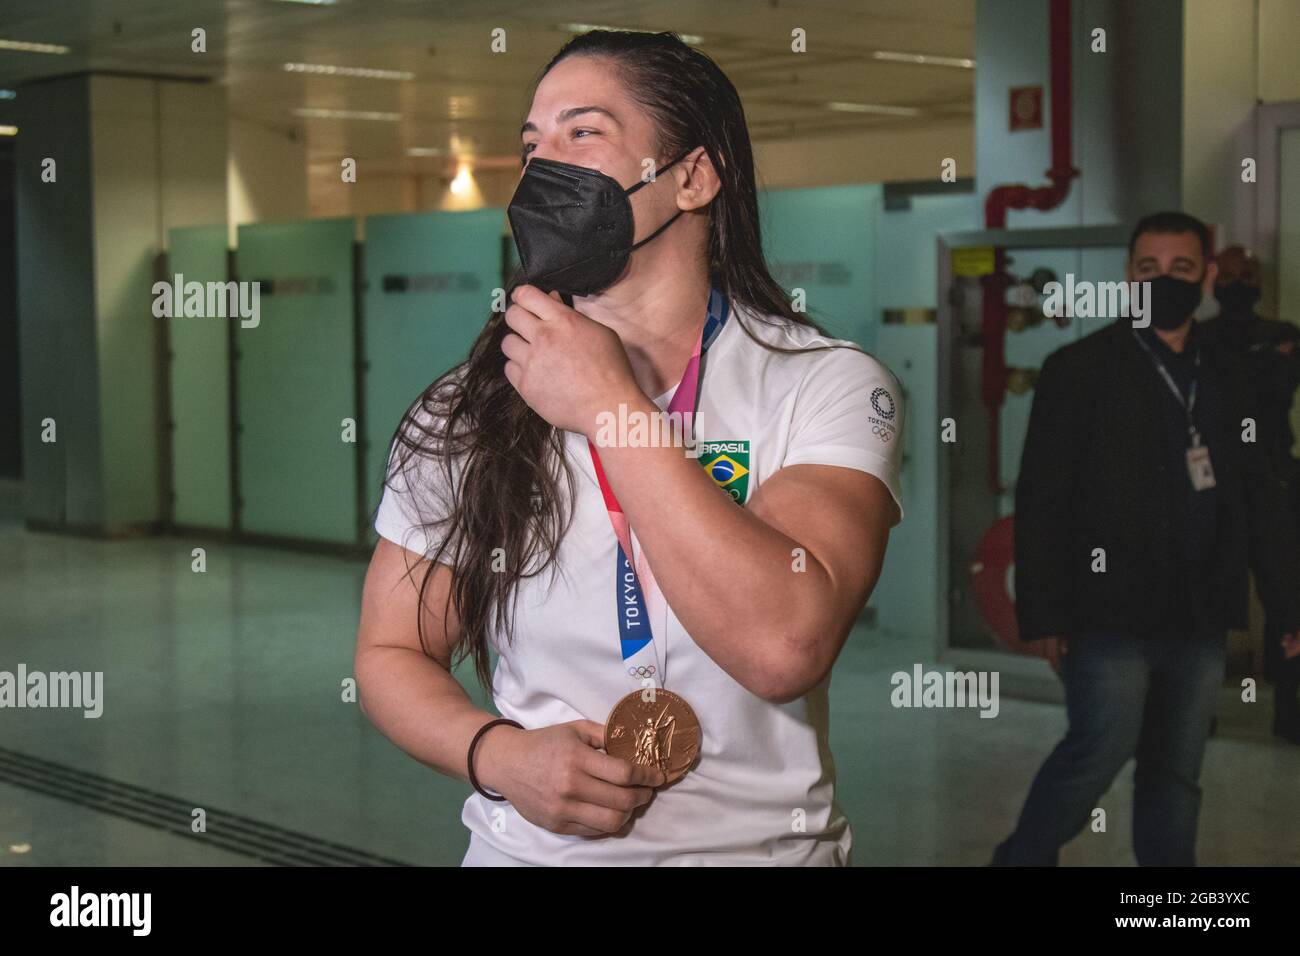 GUARULHOS, SP - 02.08.2021: ATLETAS DO JUDÔ RETORNAM AO BRASIL - Brazilian athlete Mayra Aguiar, bronze medalist in the women&#39;s under 78kg modality of Judo at the Olympic Games in Tokyo-2020, arrived early this Monday morning (02) at Guarulhos International Airport. (Photo: Yuri Murakami/Fotoarena) Stock Photo